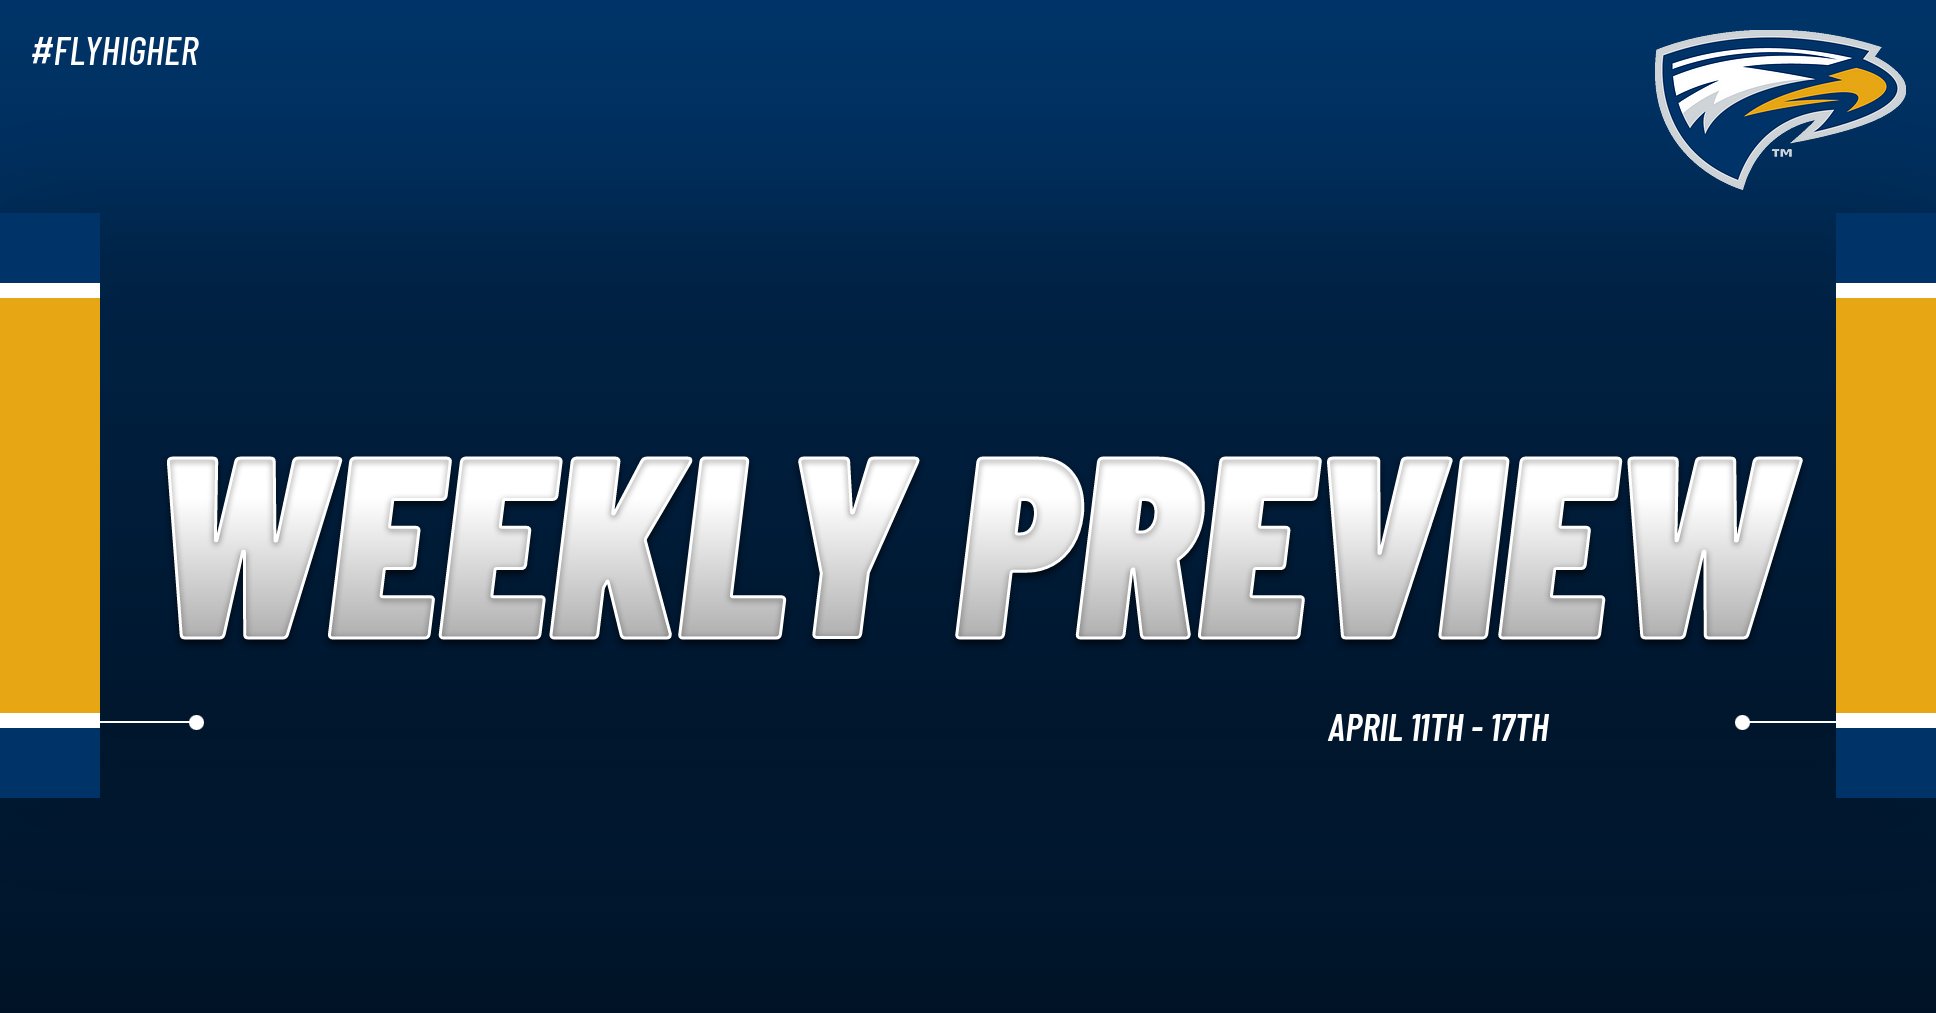 Emory Athletics Weekly Preview - April 11th - 17th